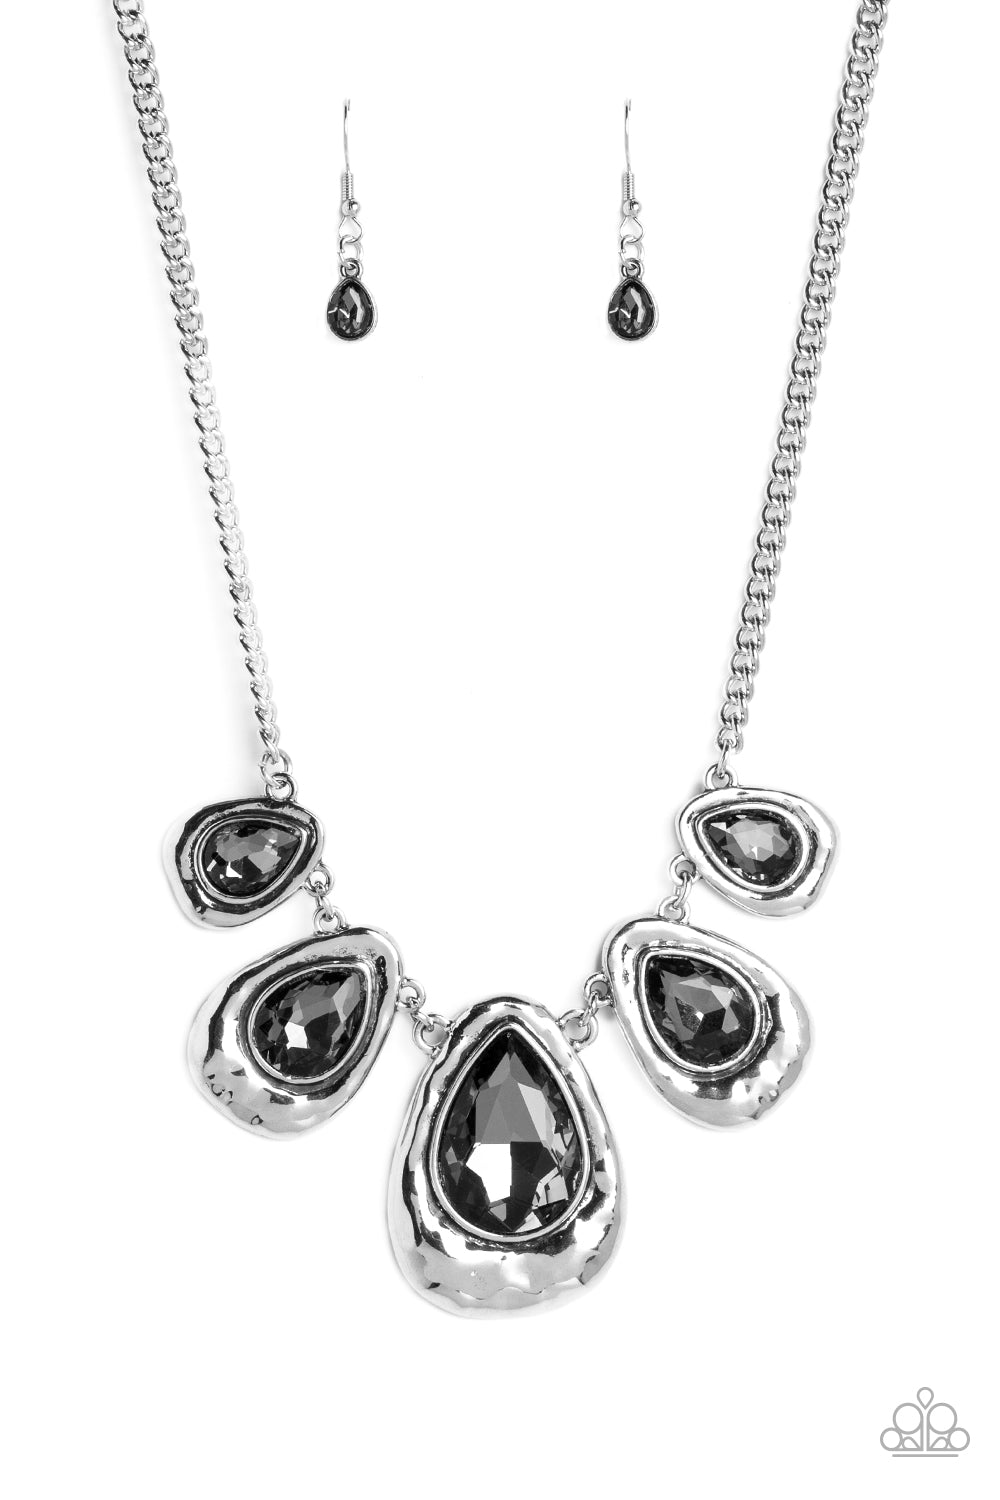 five-dollar-jewelry-formally-forged-silver-necklace-paparazzi-accessories